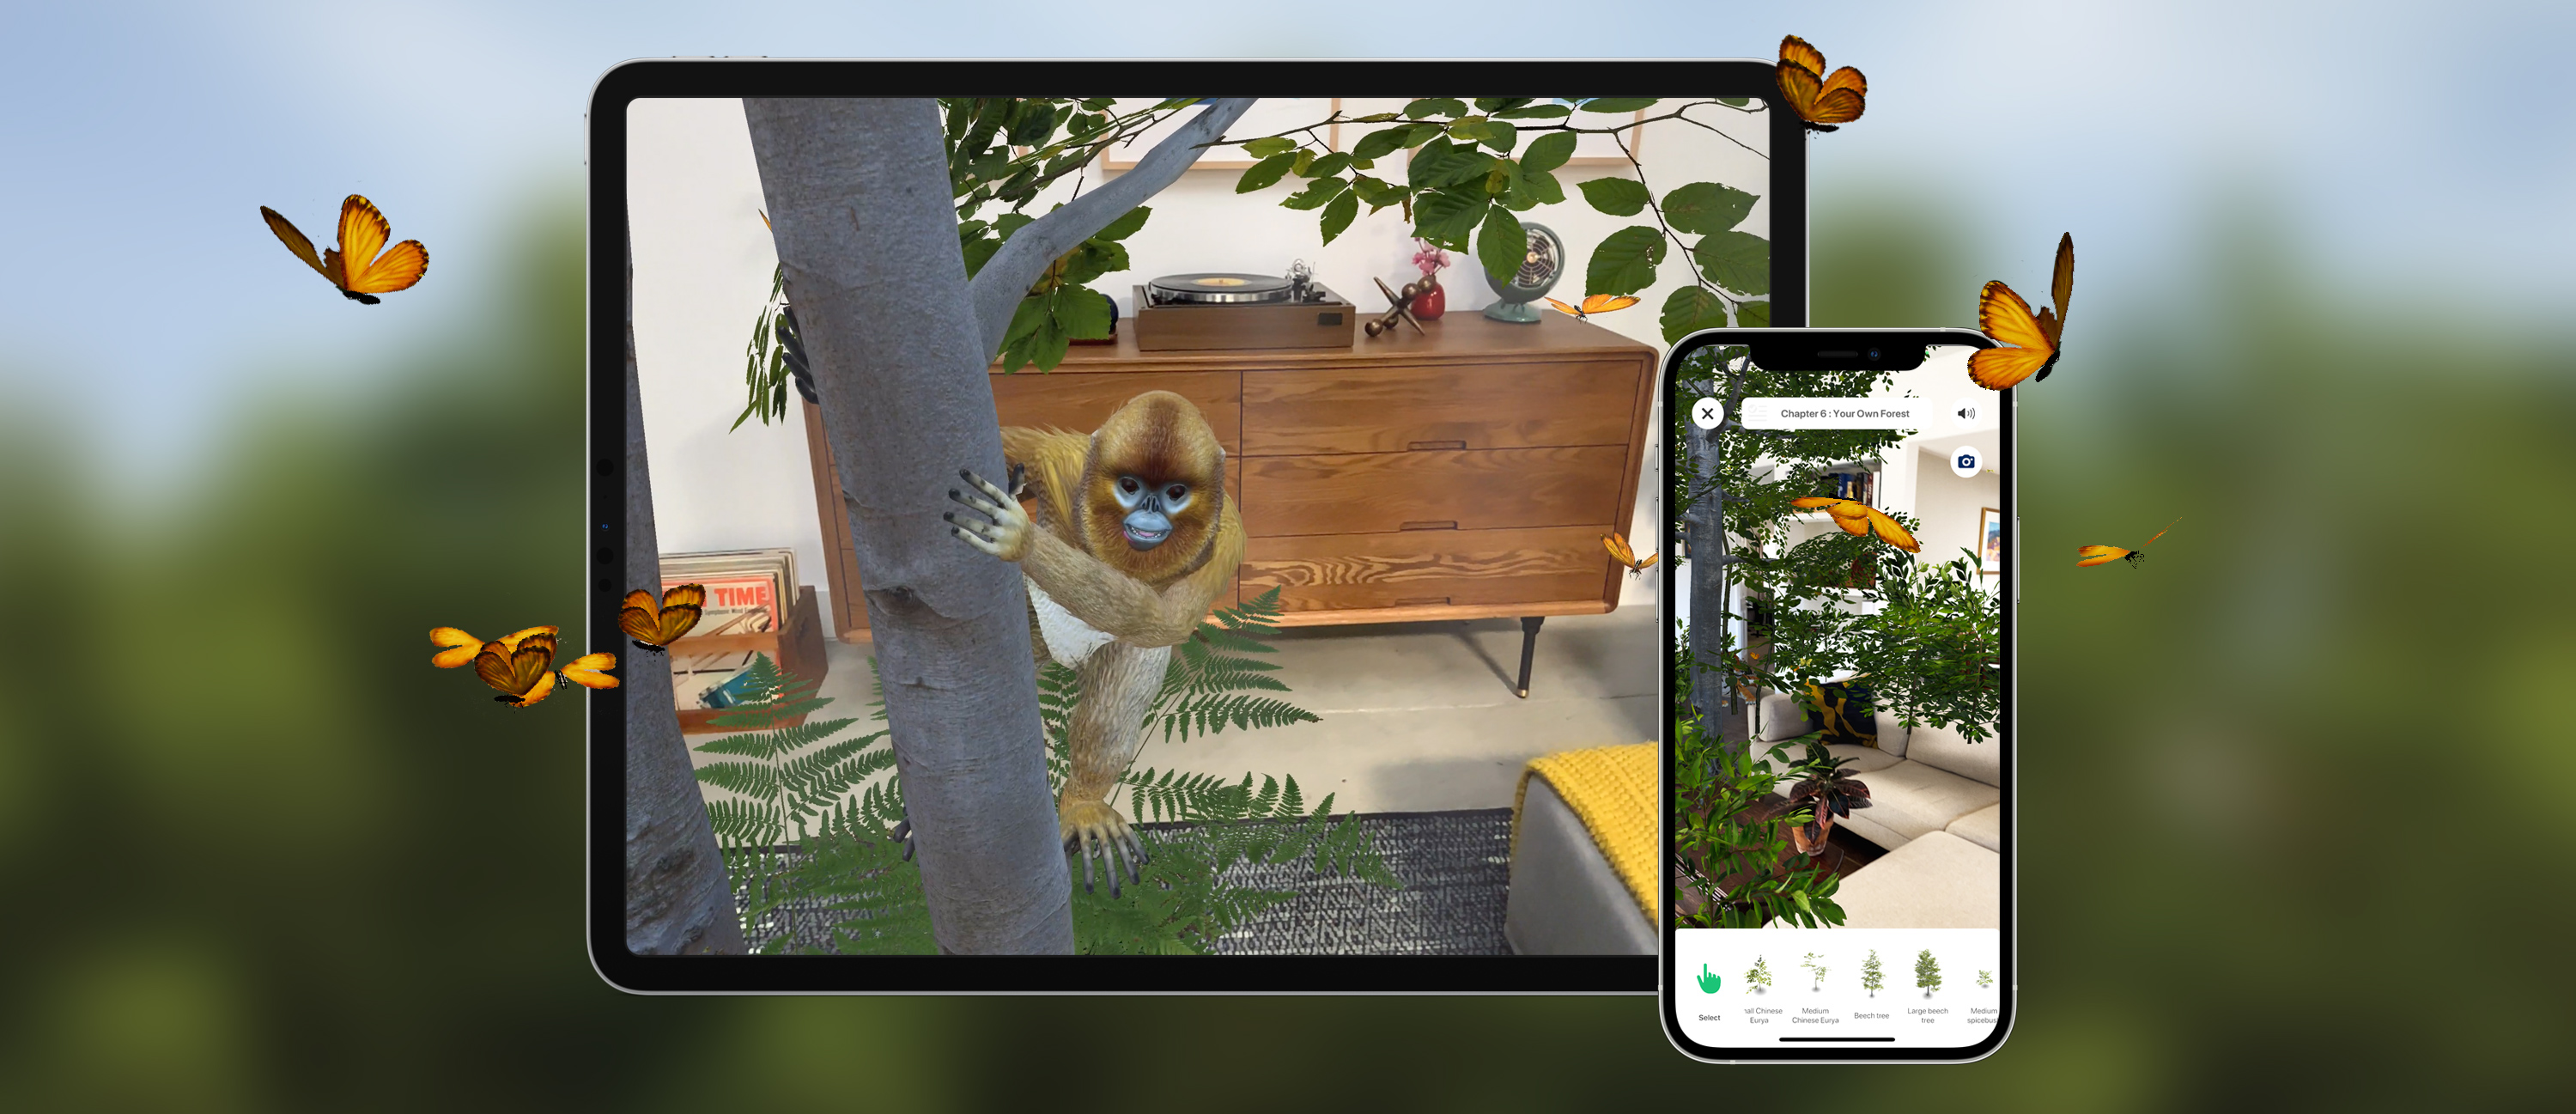 ipad and iPhone showing AR trees and animals in a room